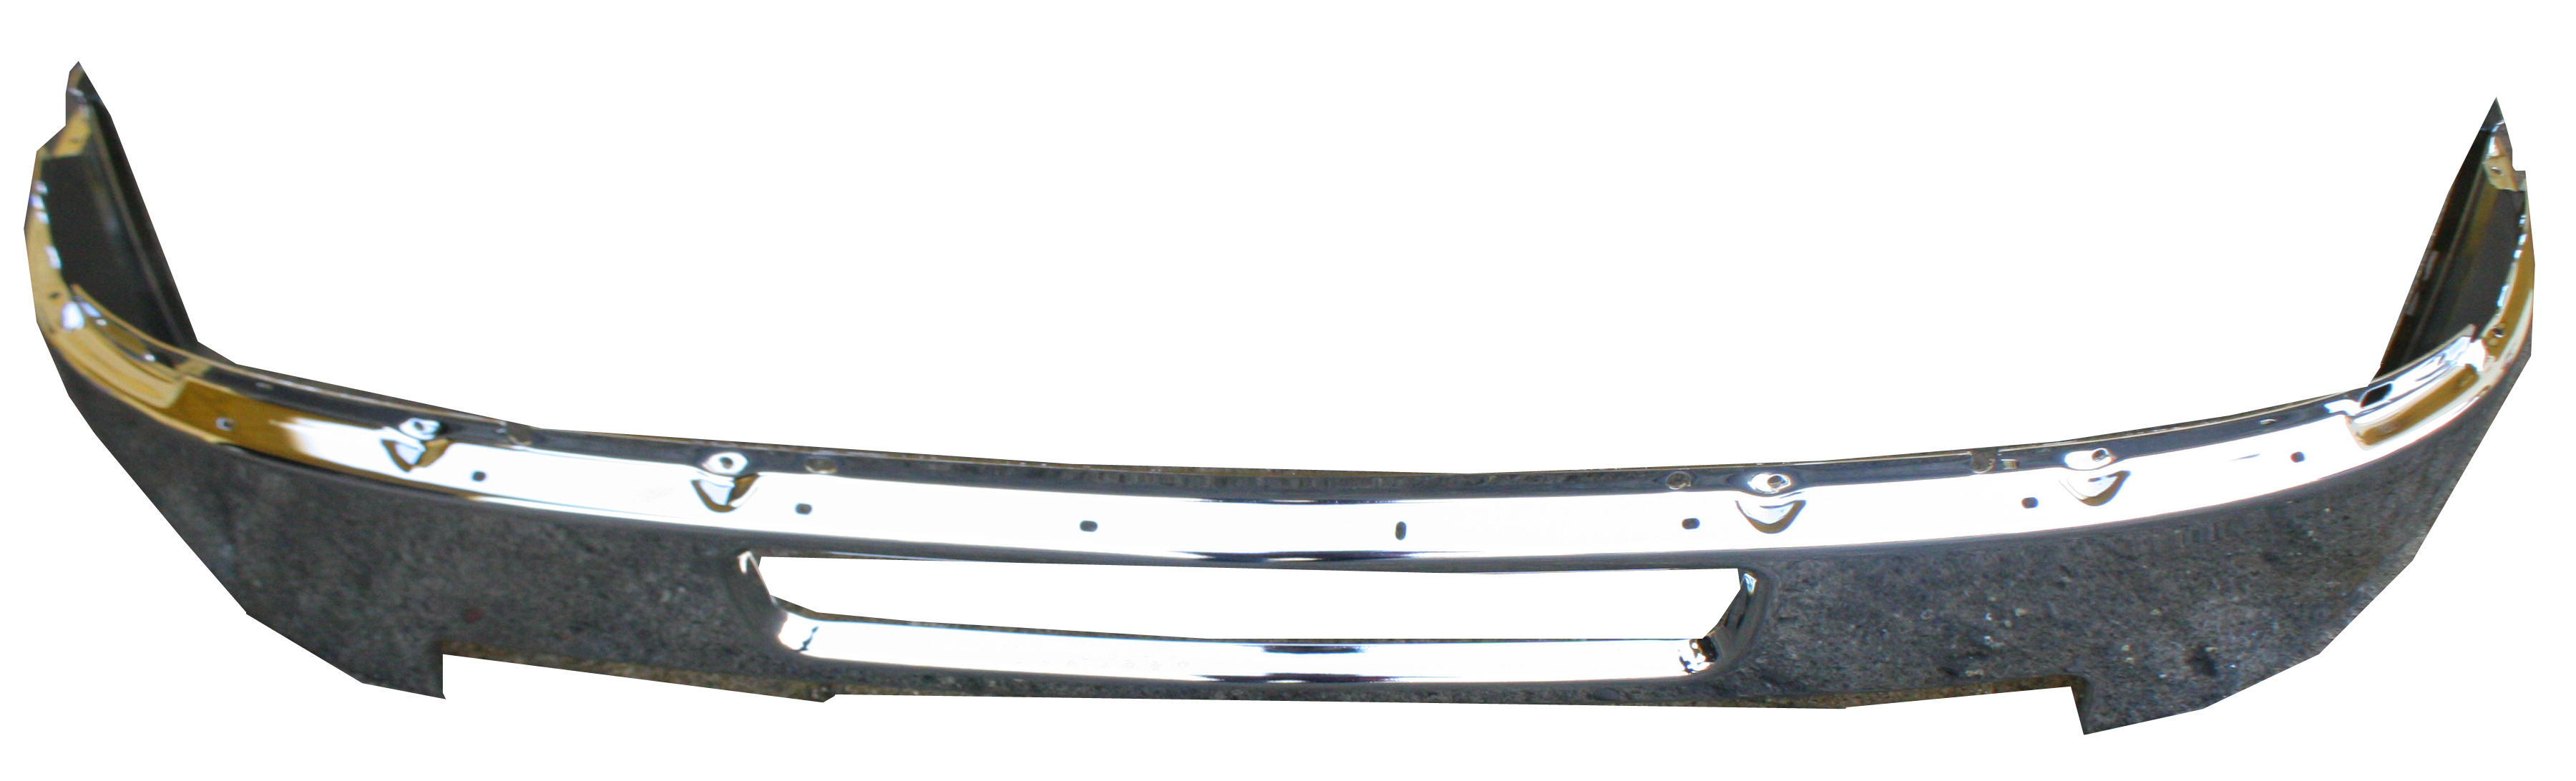 Aftermarket METAL FRONT BUMPERS for CHEVROLET - SILVERADO 2500 HD, SILVERADO 2500 HD,11-14,Front bumper face bar